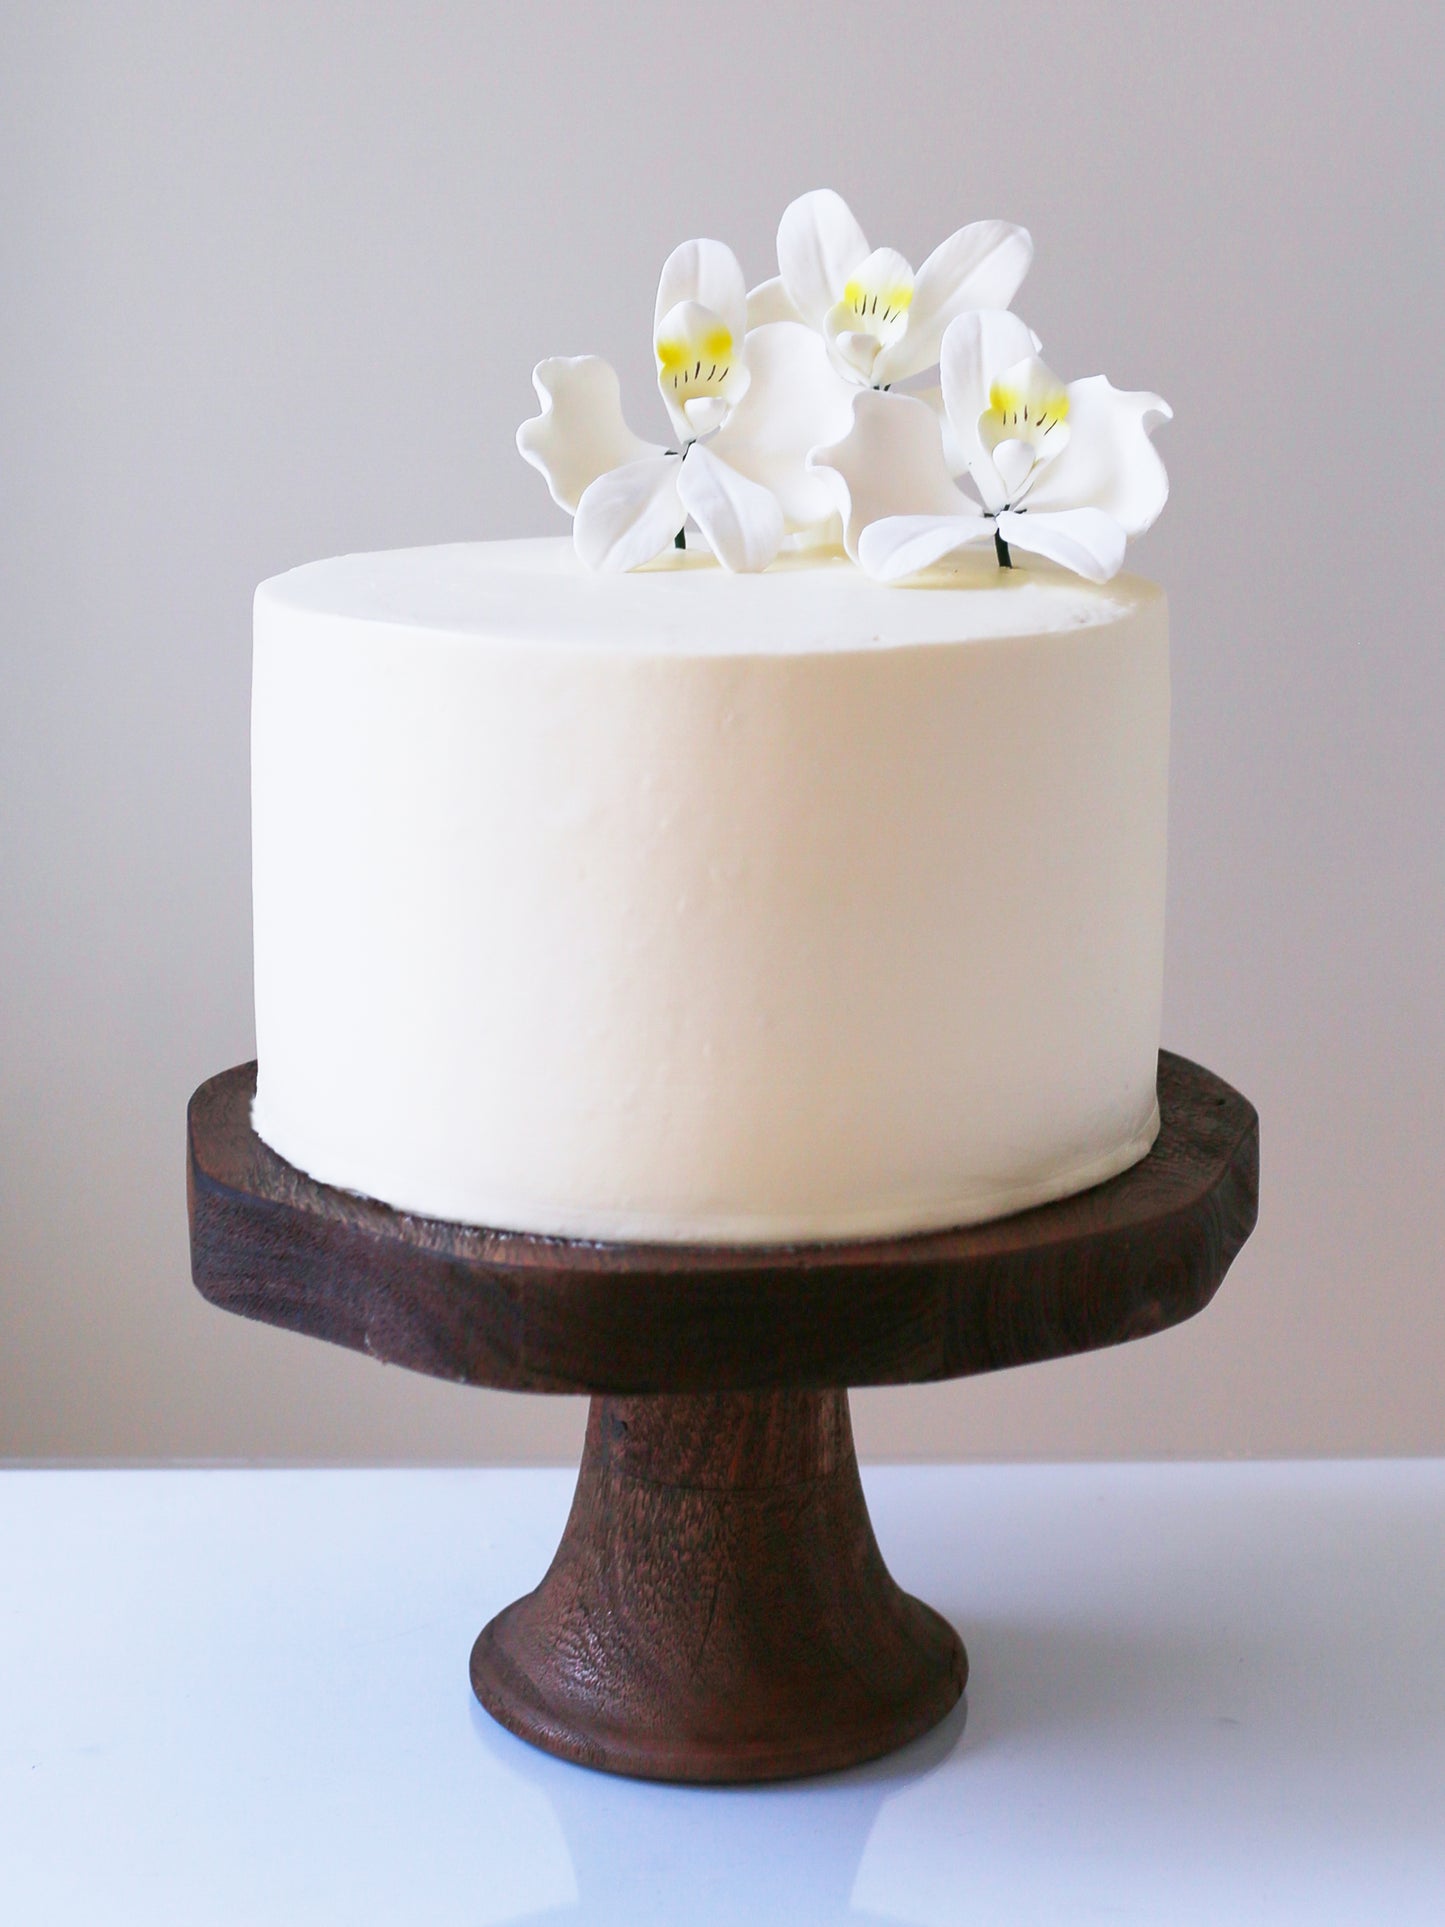 white orchid cake decorations